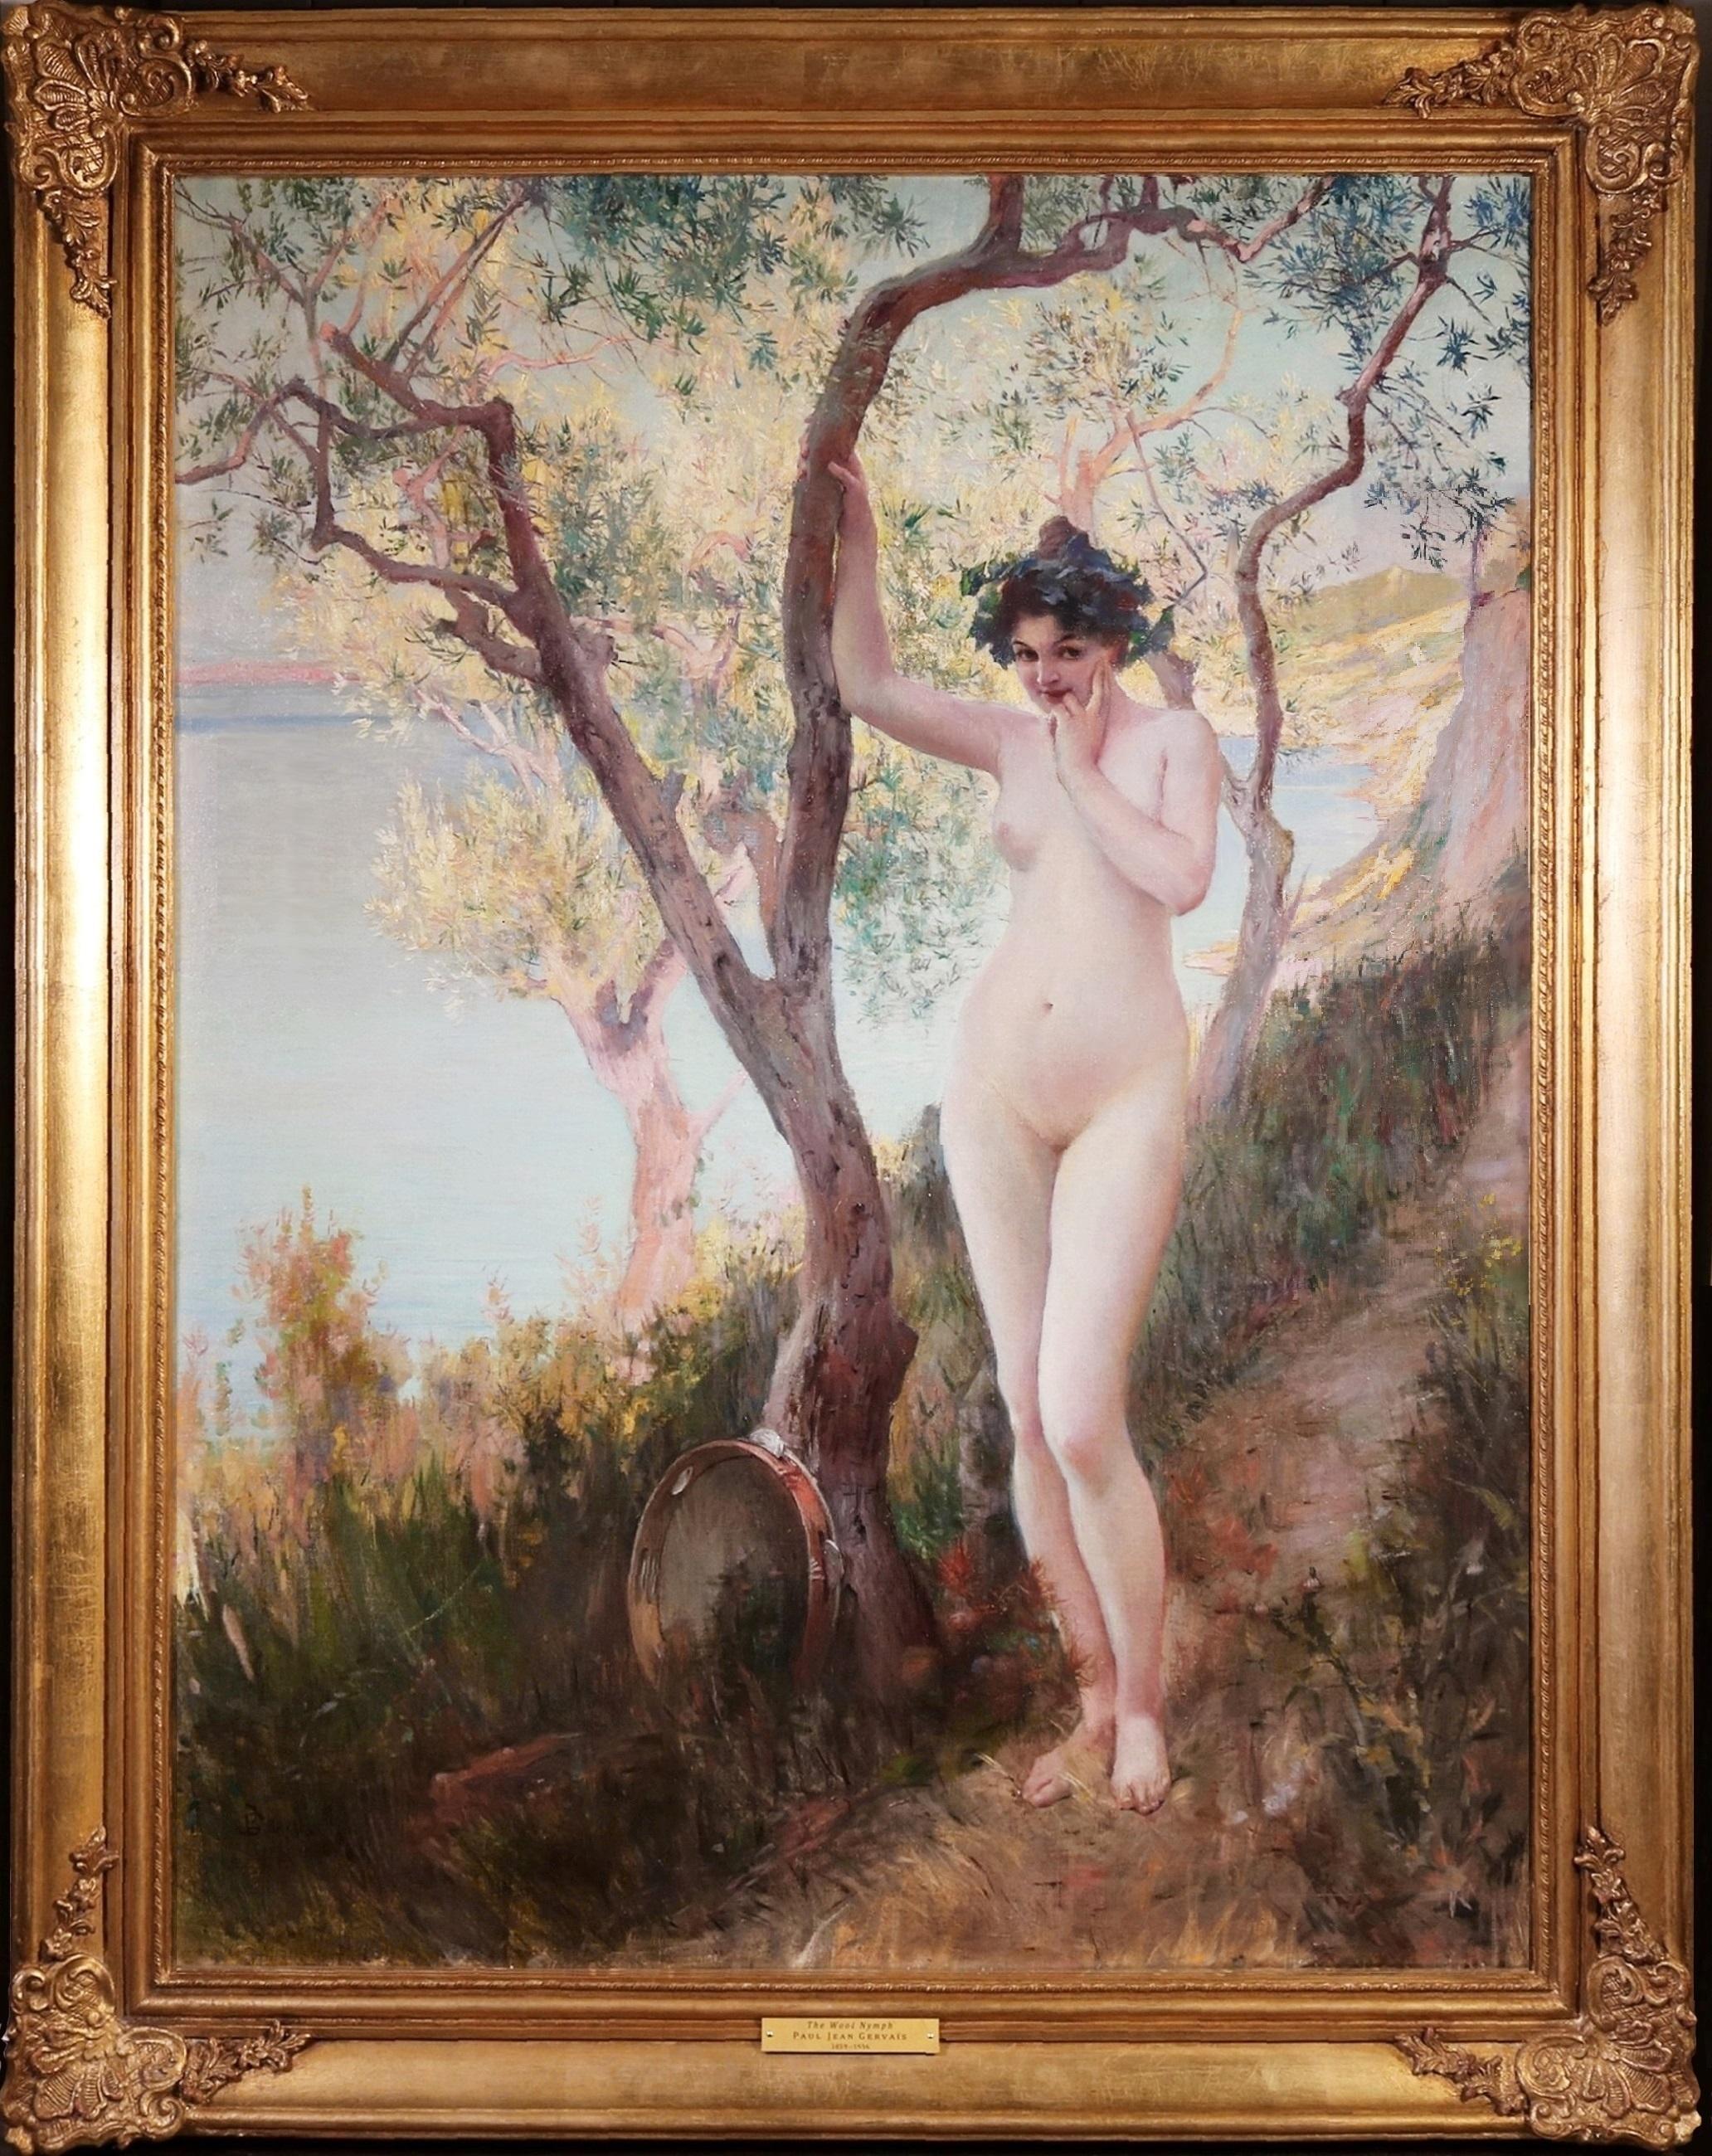 The Wood Nymph - Large 19th Century French Post Impressionist Nude Portrait  - Painting by Paul-Jean-Louis Gervais